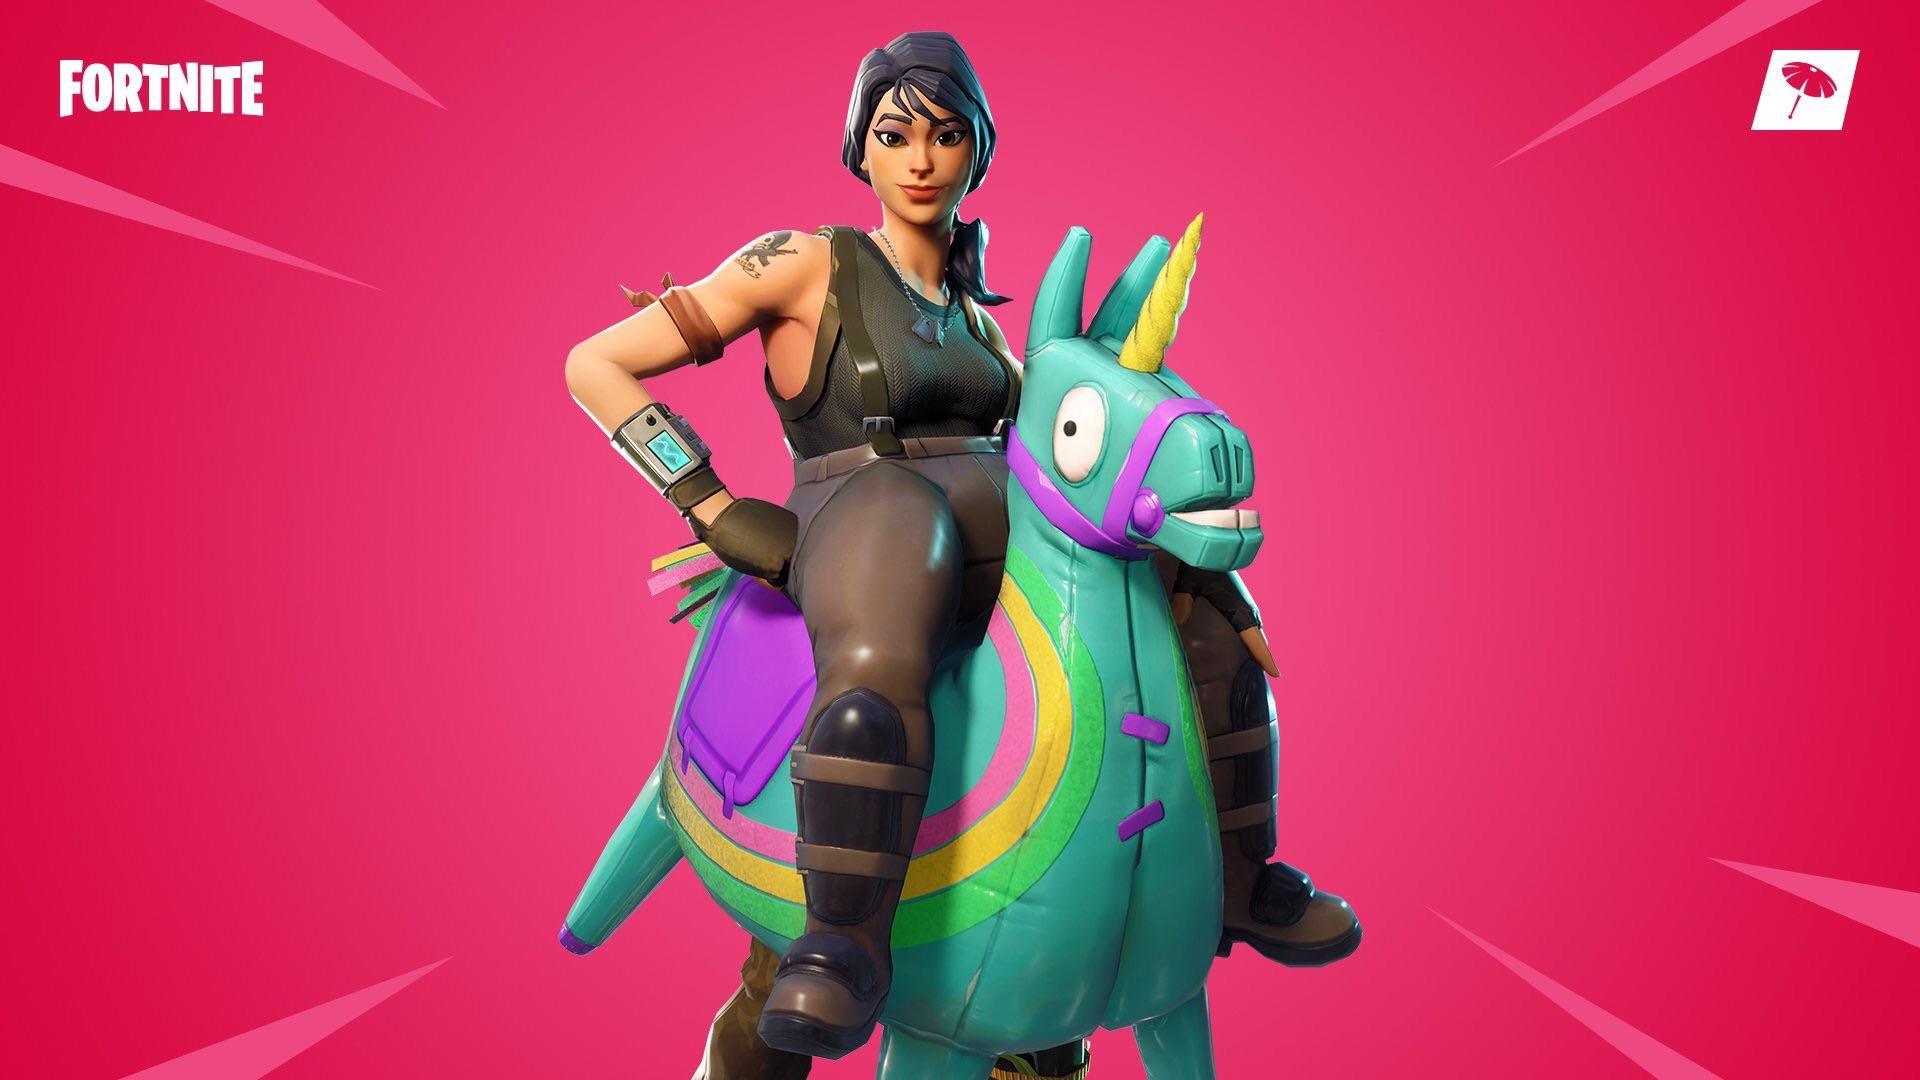 Add The Option To Remove Llama From Yee Haw Outfit And Be